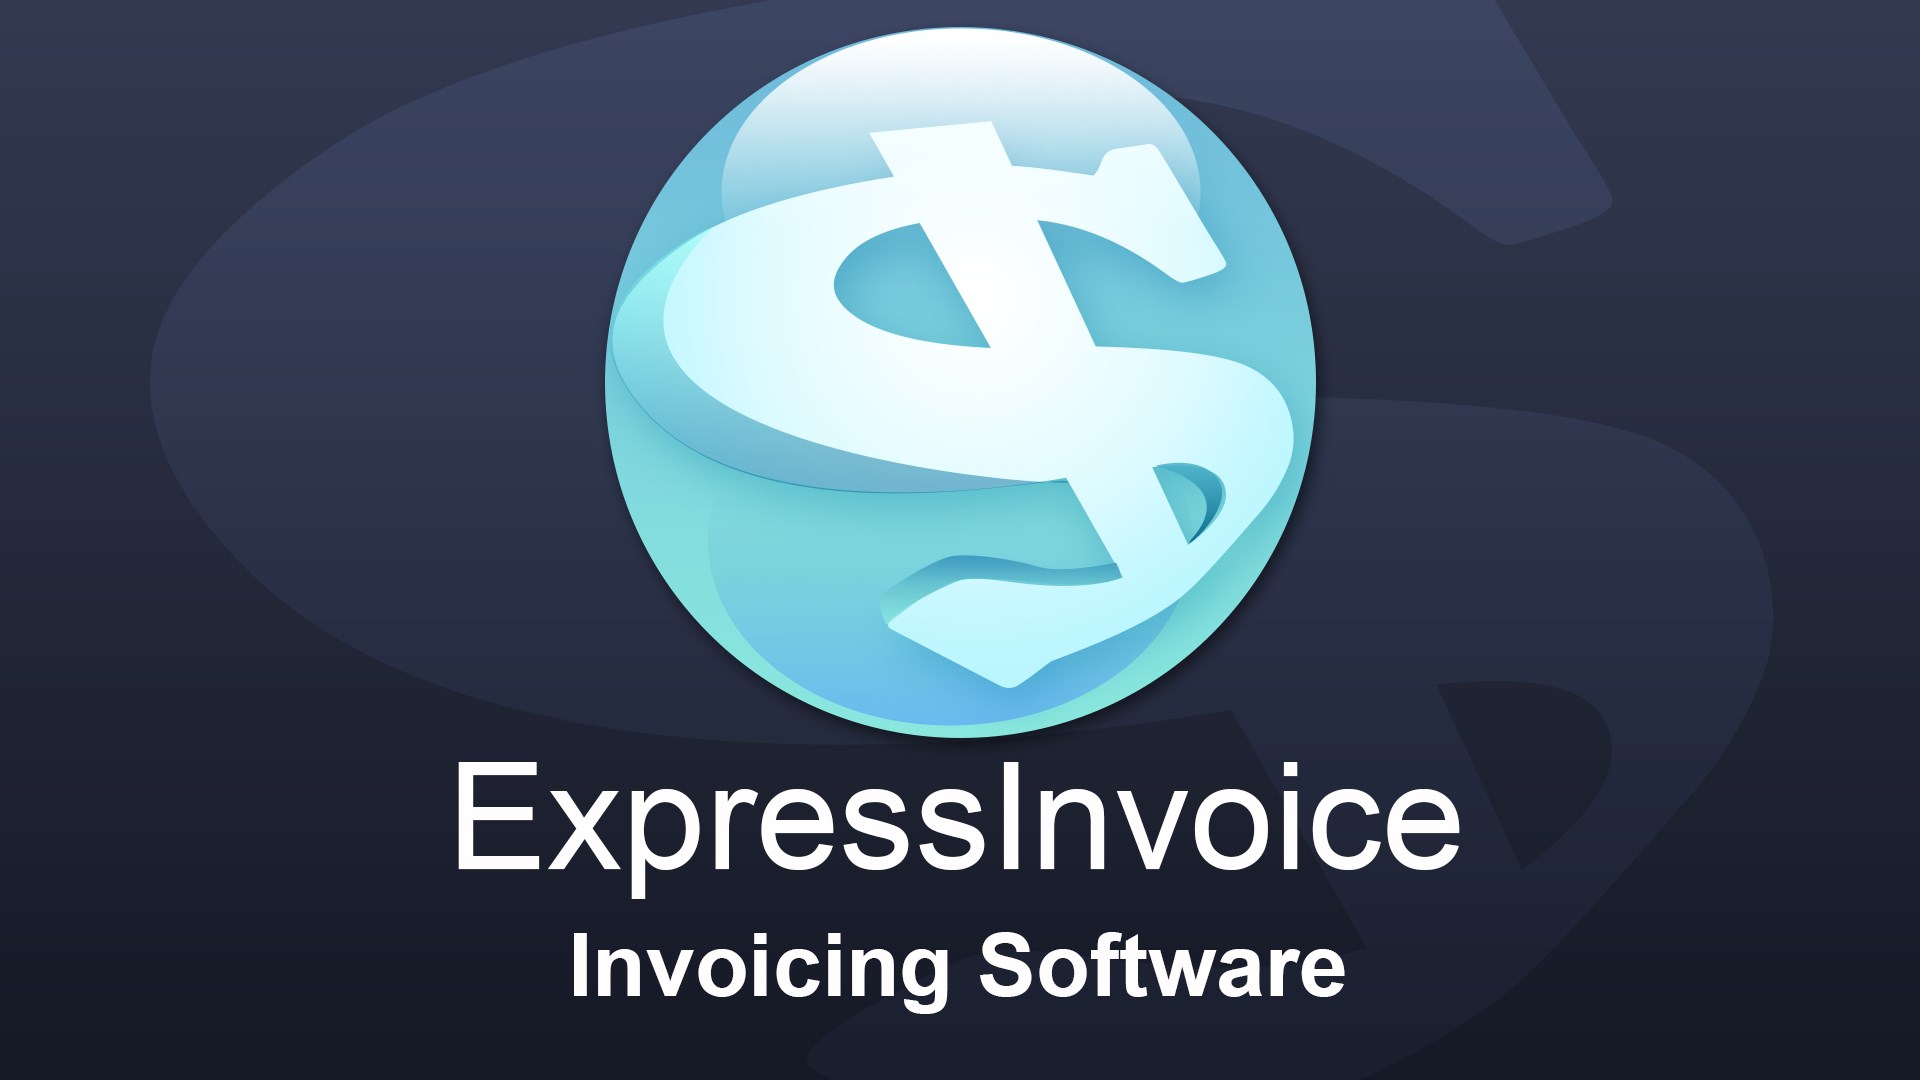 NCH: Express Invoice Invoicing Key